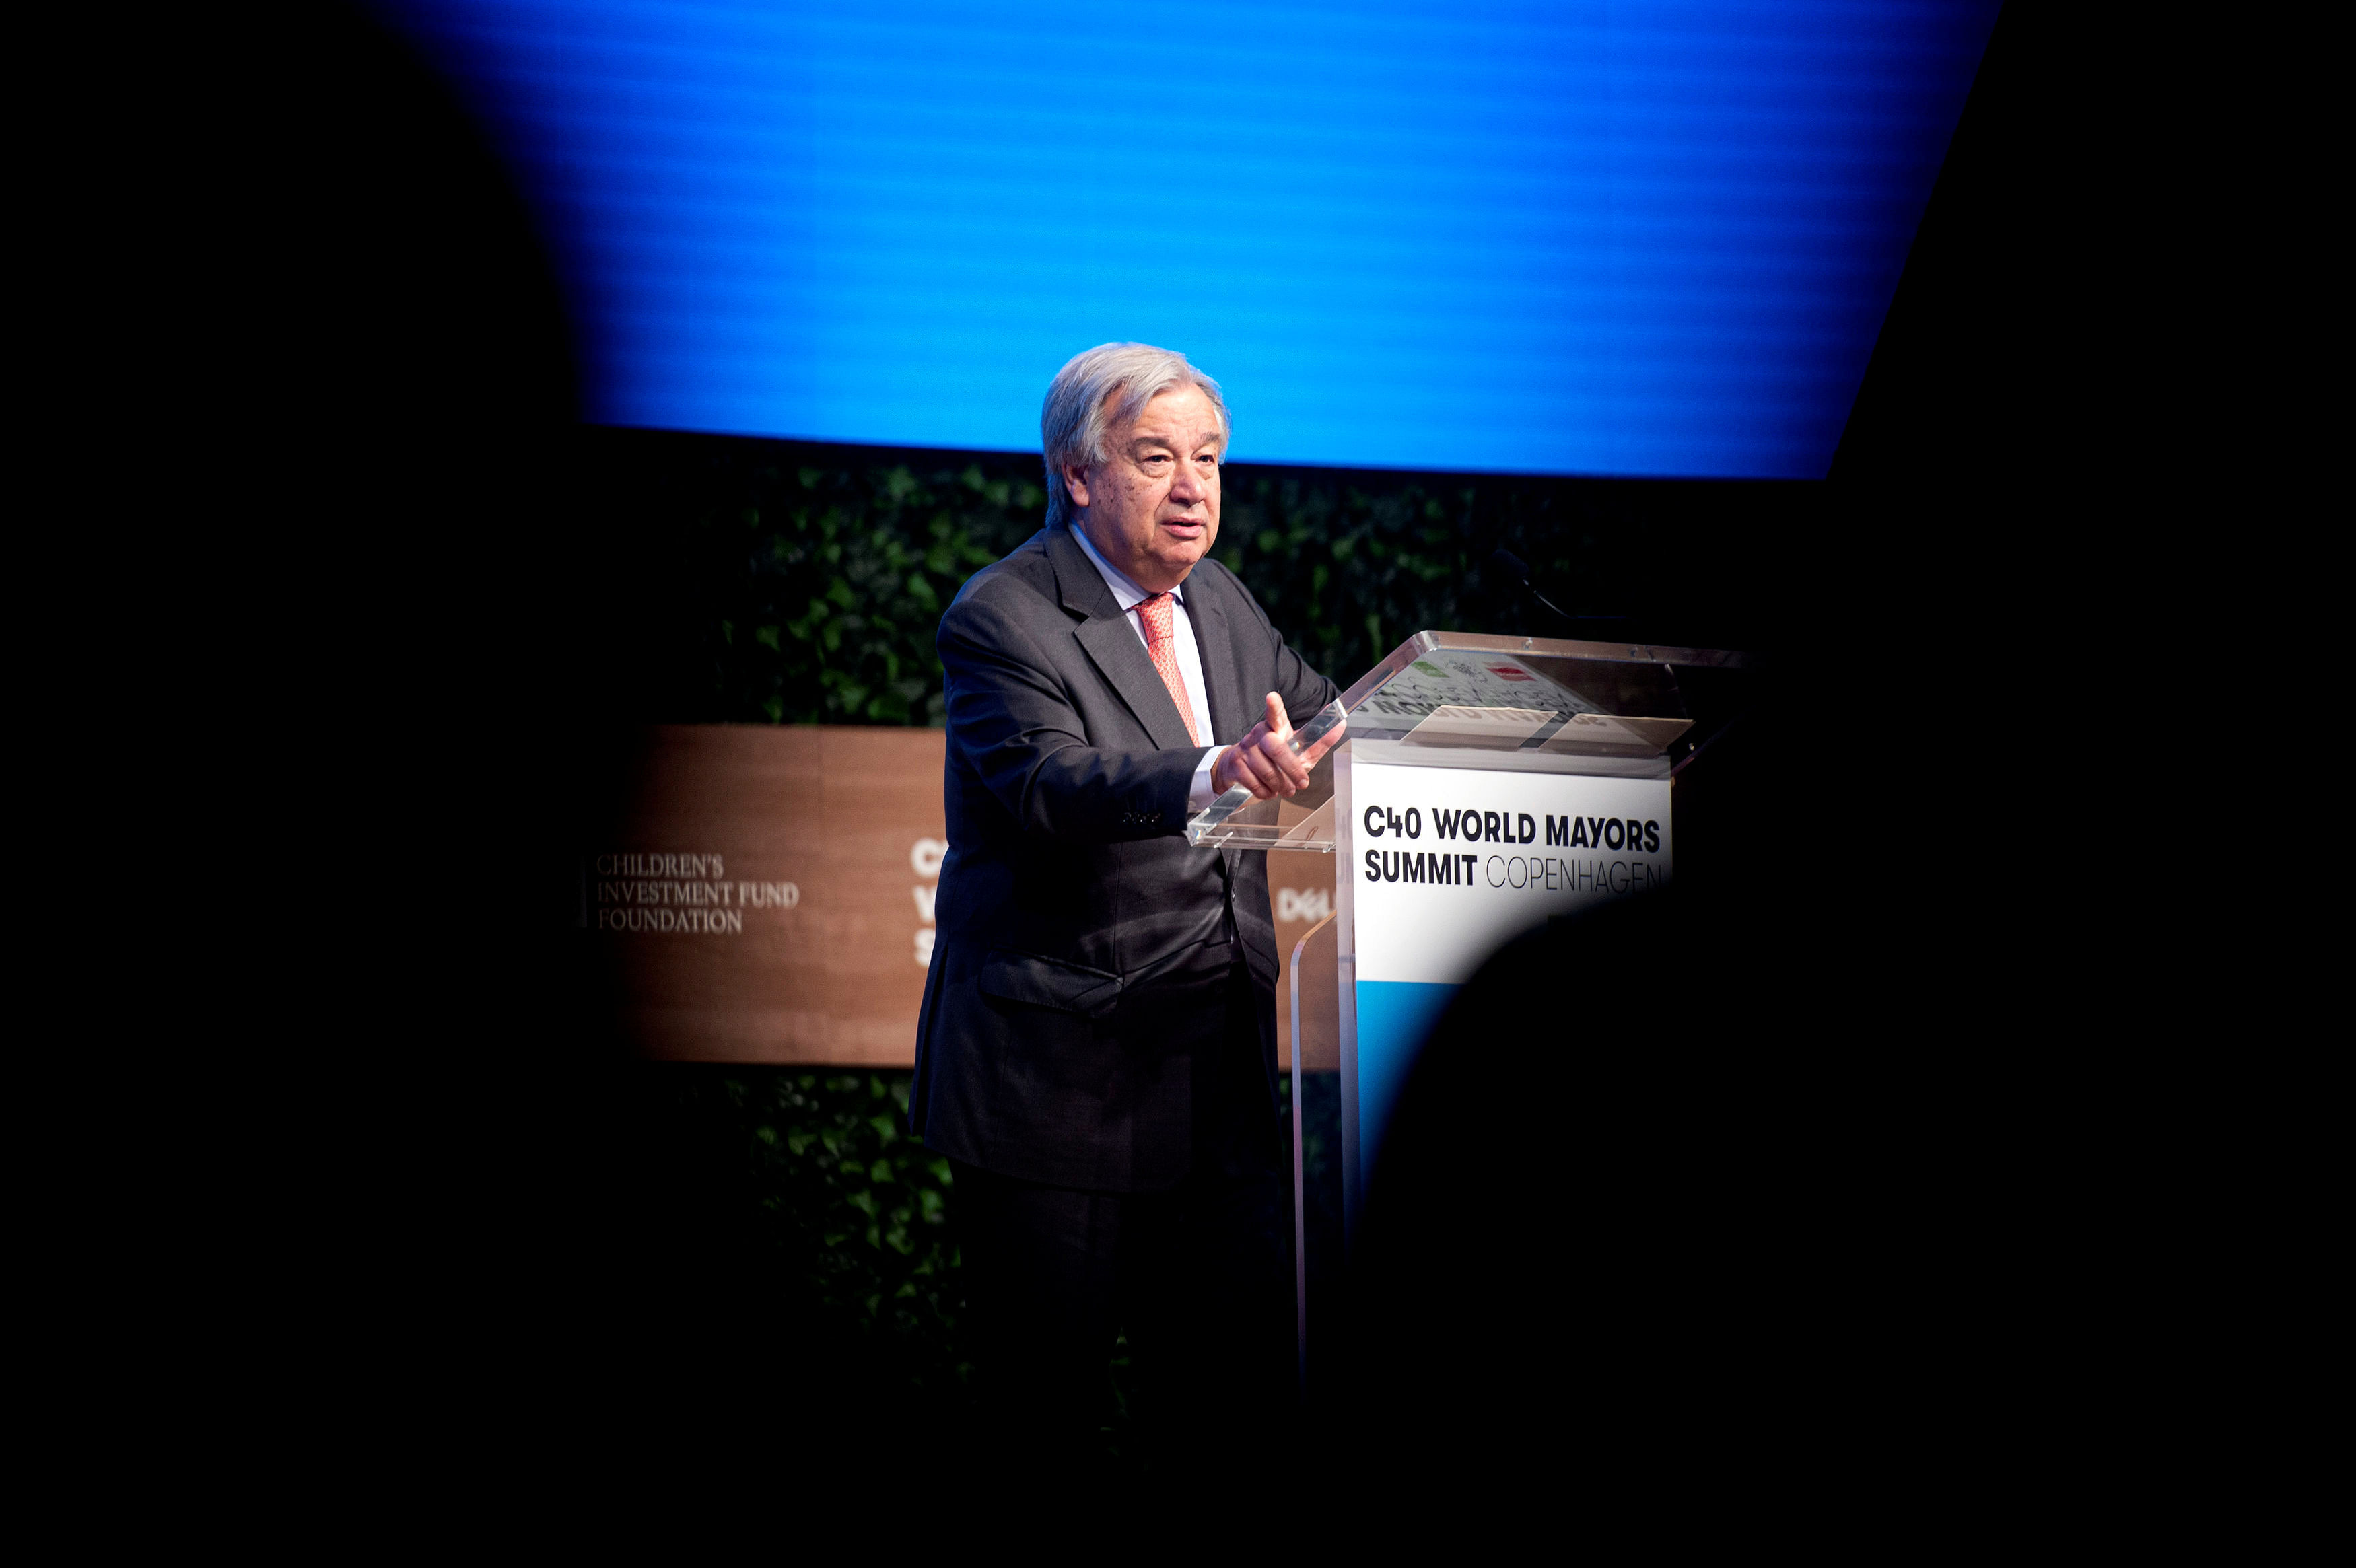 Antonio Guterres, Secretary-General of the United Nations delivers his keynote at the C40 World Mayors Summit at the main stage in Tivoli Conference Centre, Copenhagen, Denmark. (Reuters Photo)